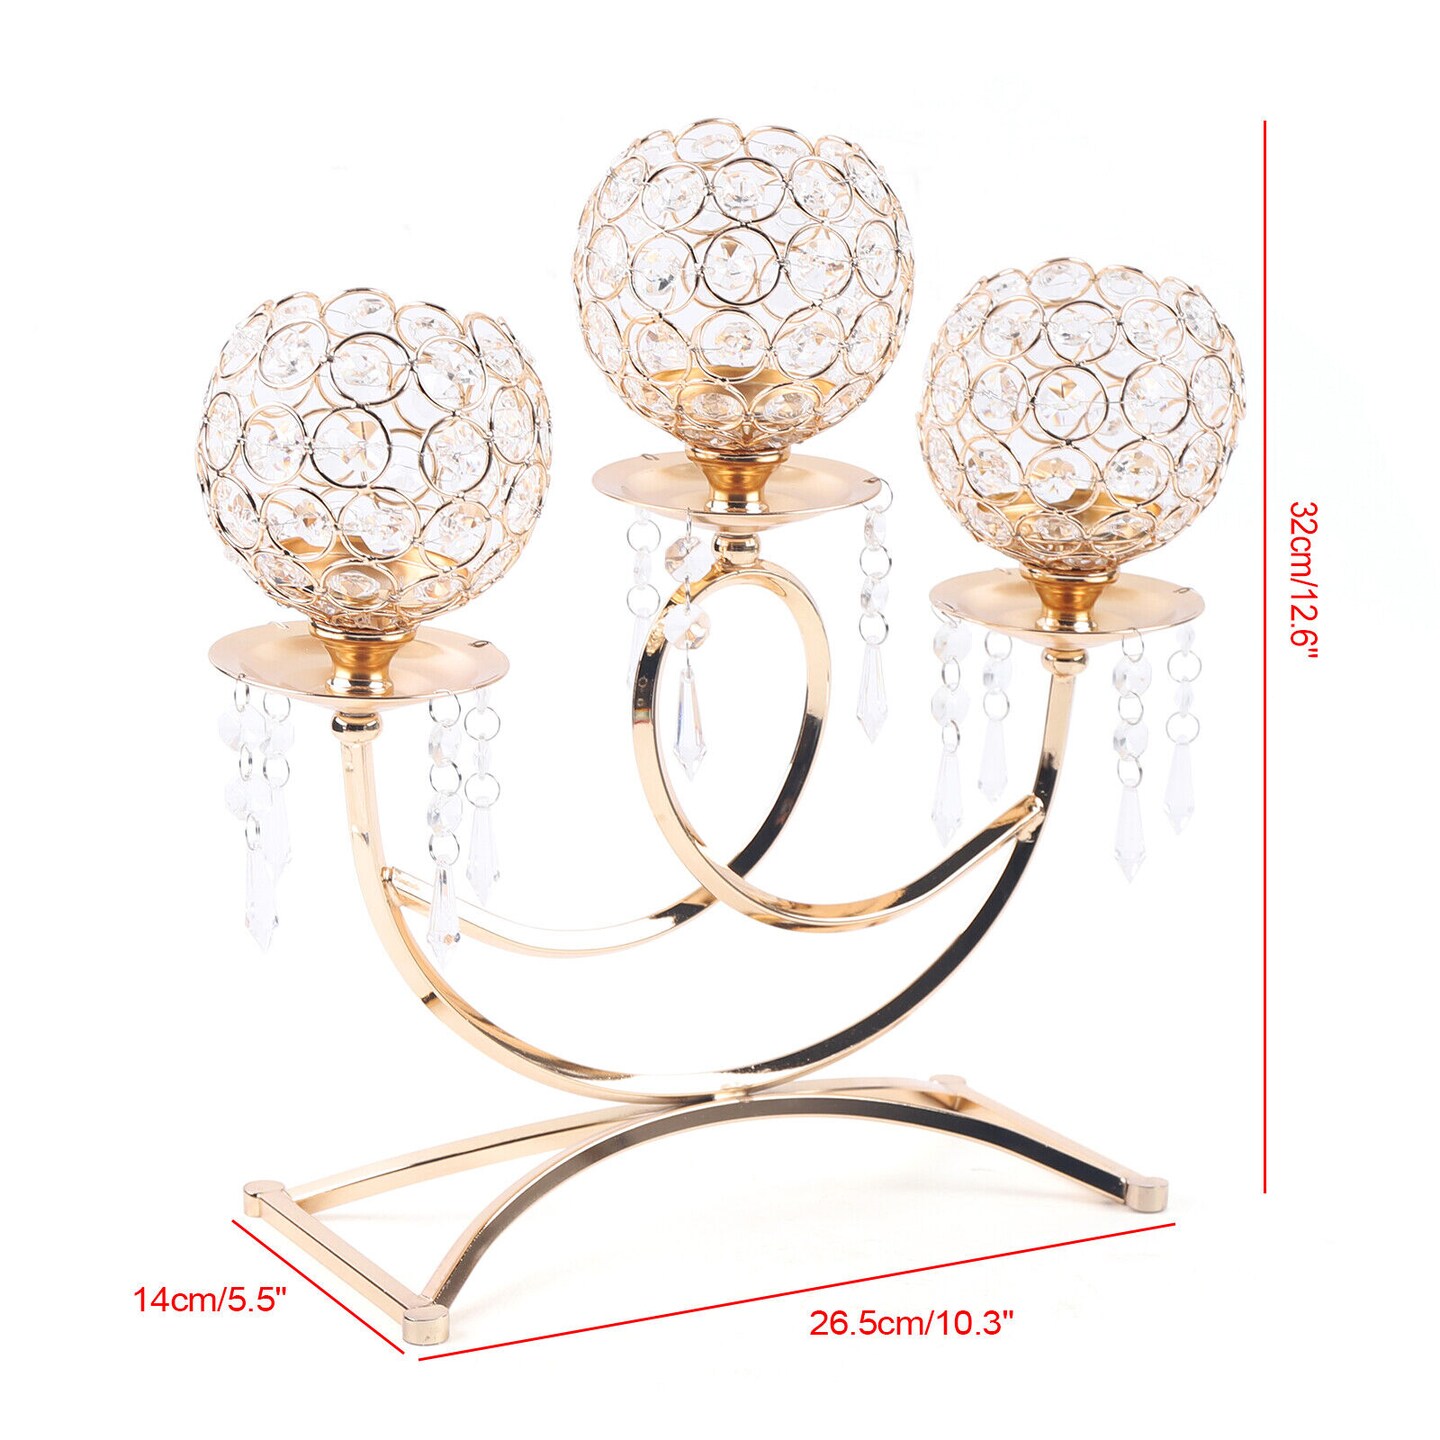 Kitcheniva 3 Arms Free Standing Crystal Candle Holder